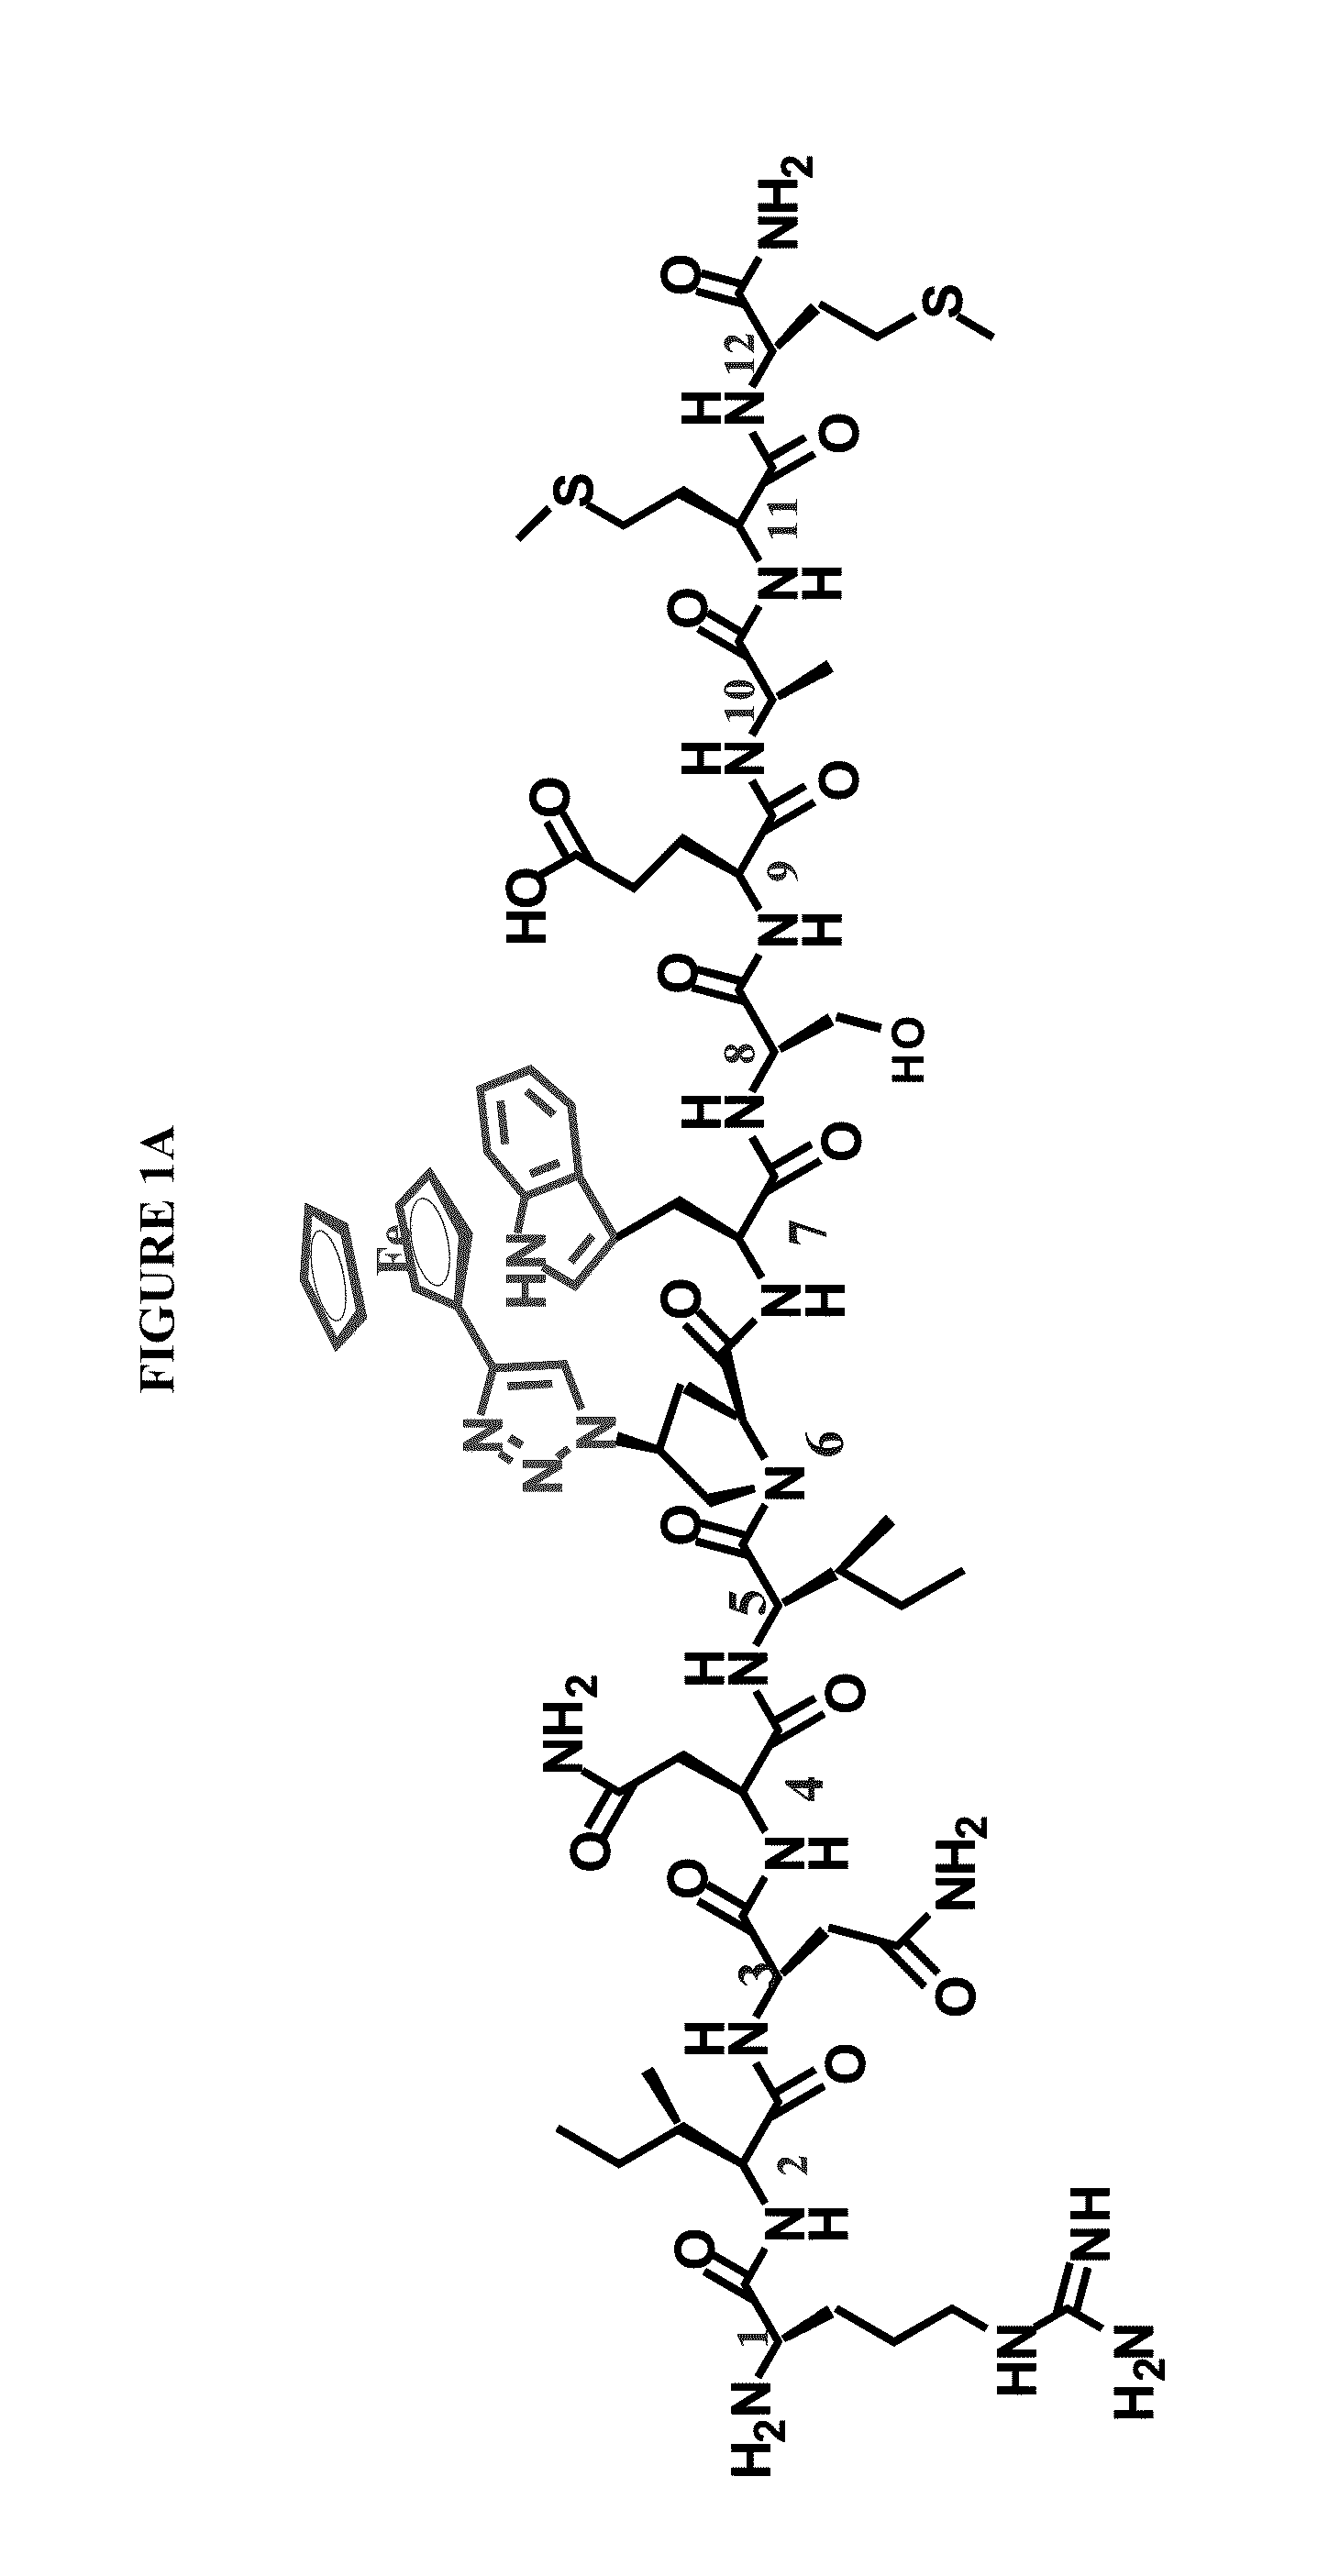 Active Cores of Peptide Triazole HIV-1 Entry Inhibitors